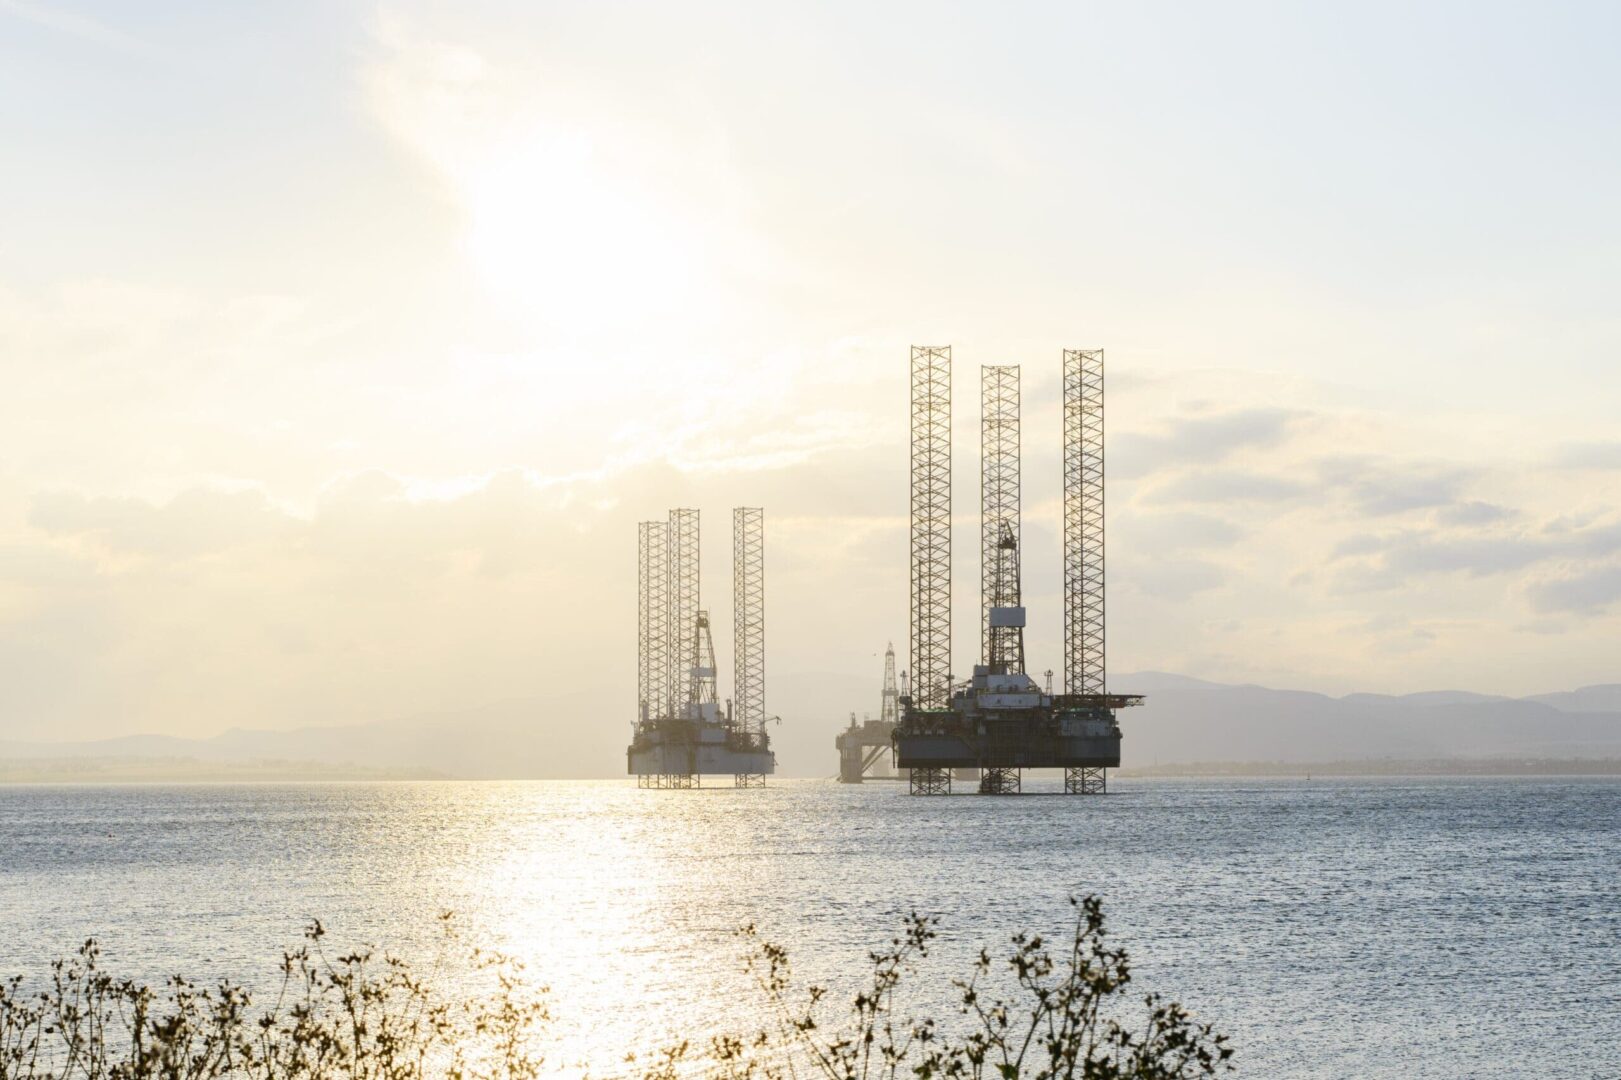 north-sea-oil-platforms-at-sunset-cromarty-firth-scotland